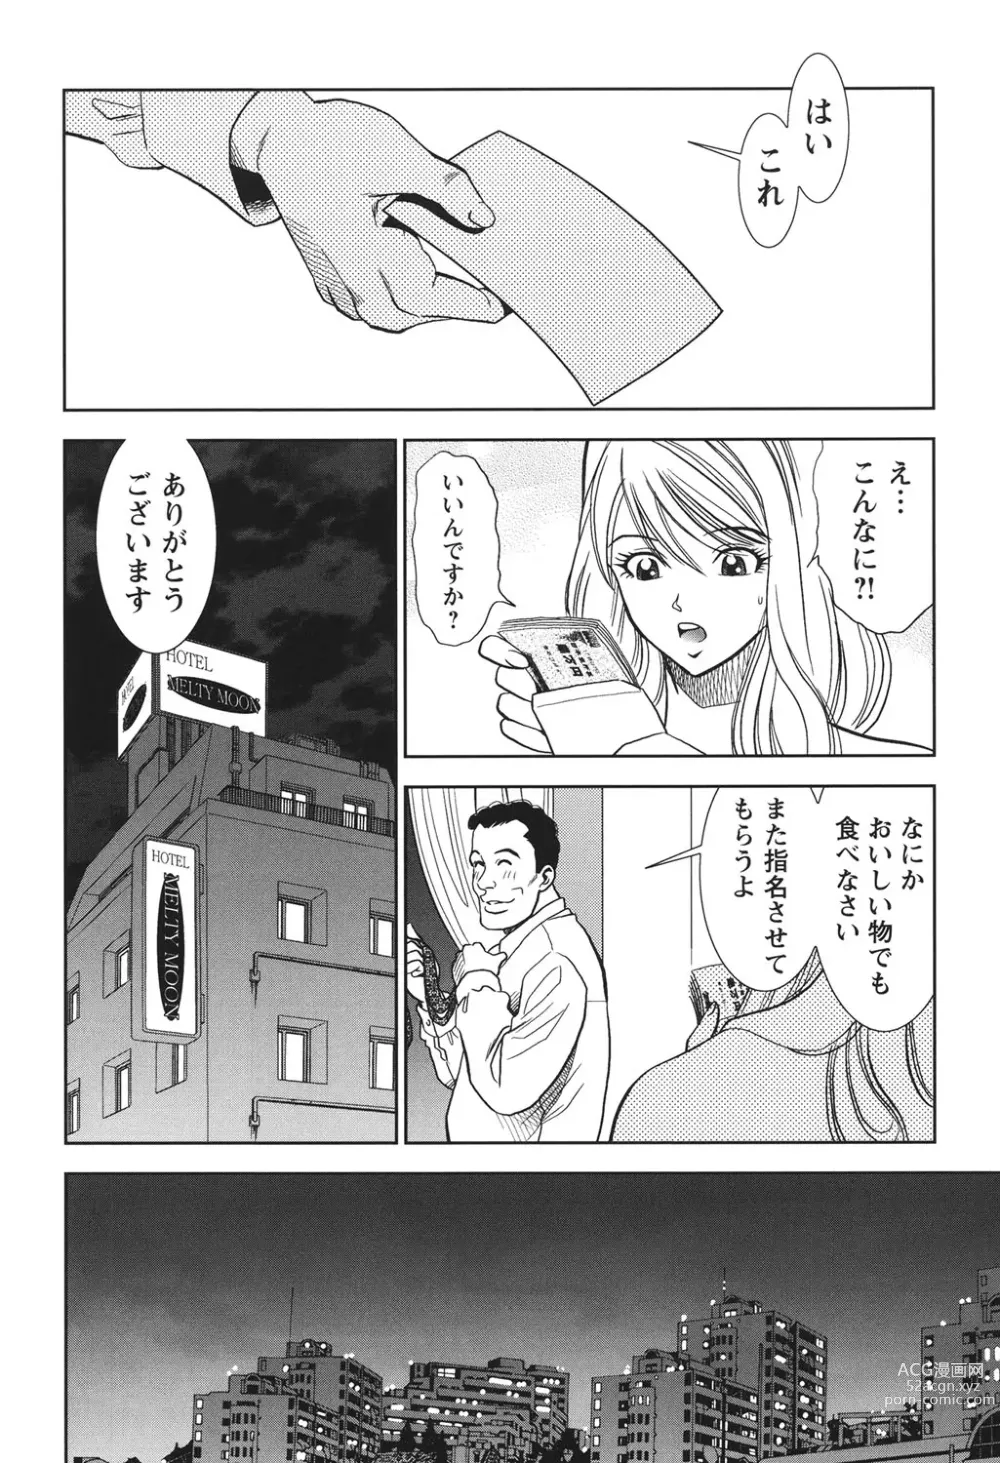 Page 207 of manga Haitoku no Meikyuu - a married woman got lost in the labyrinth of immorality